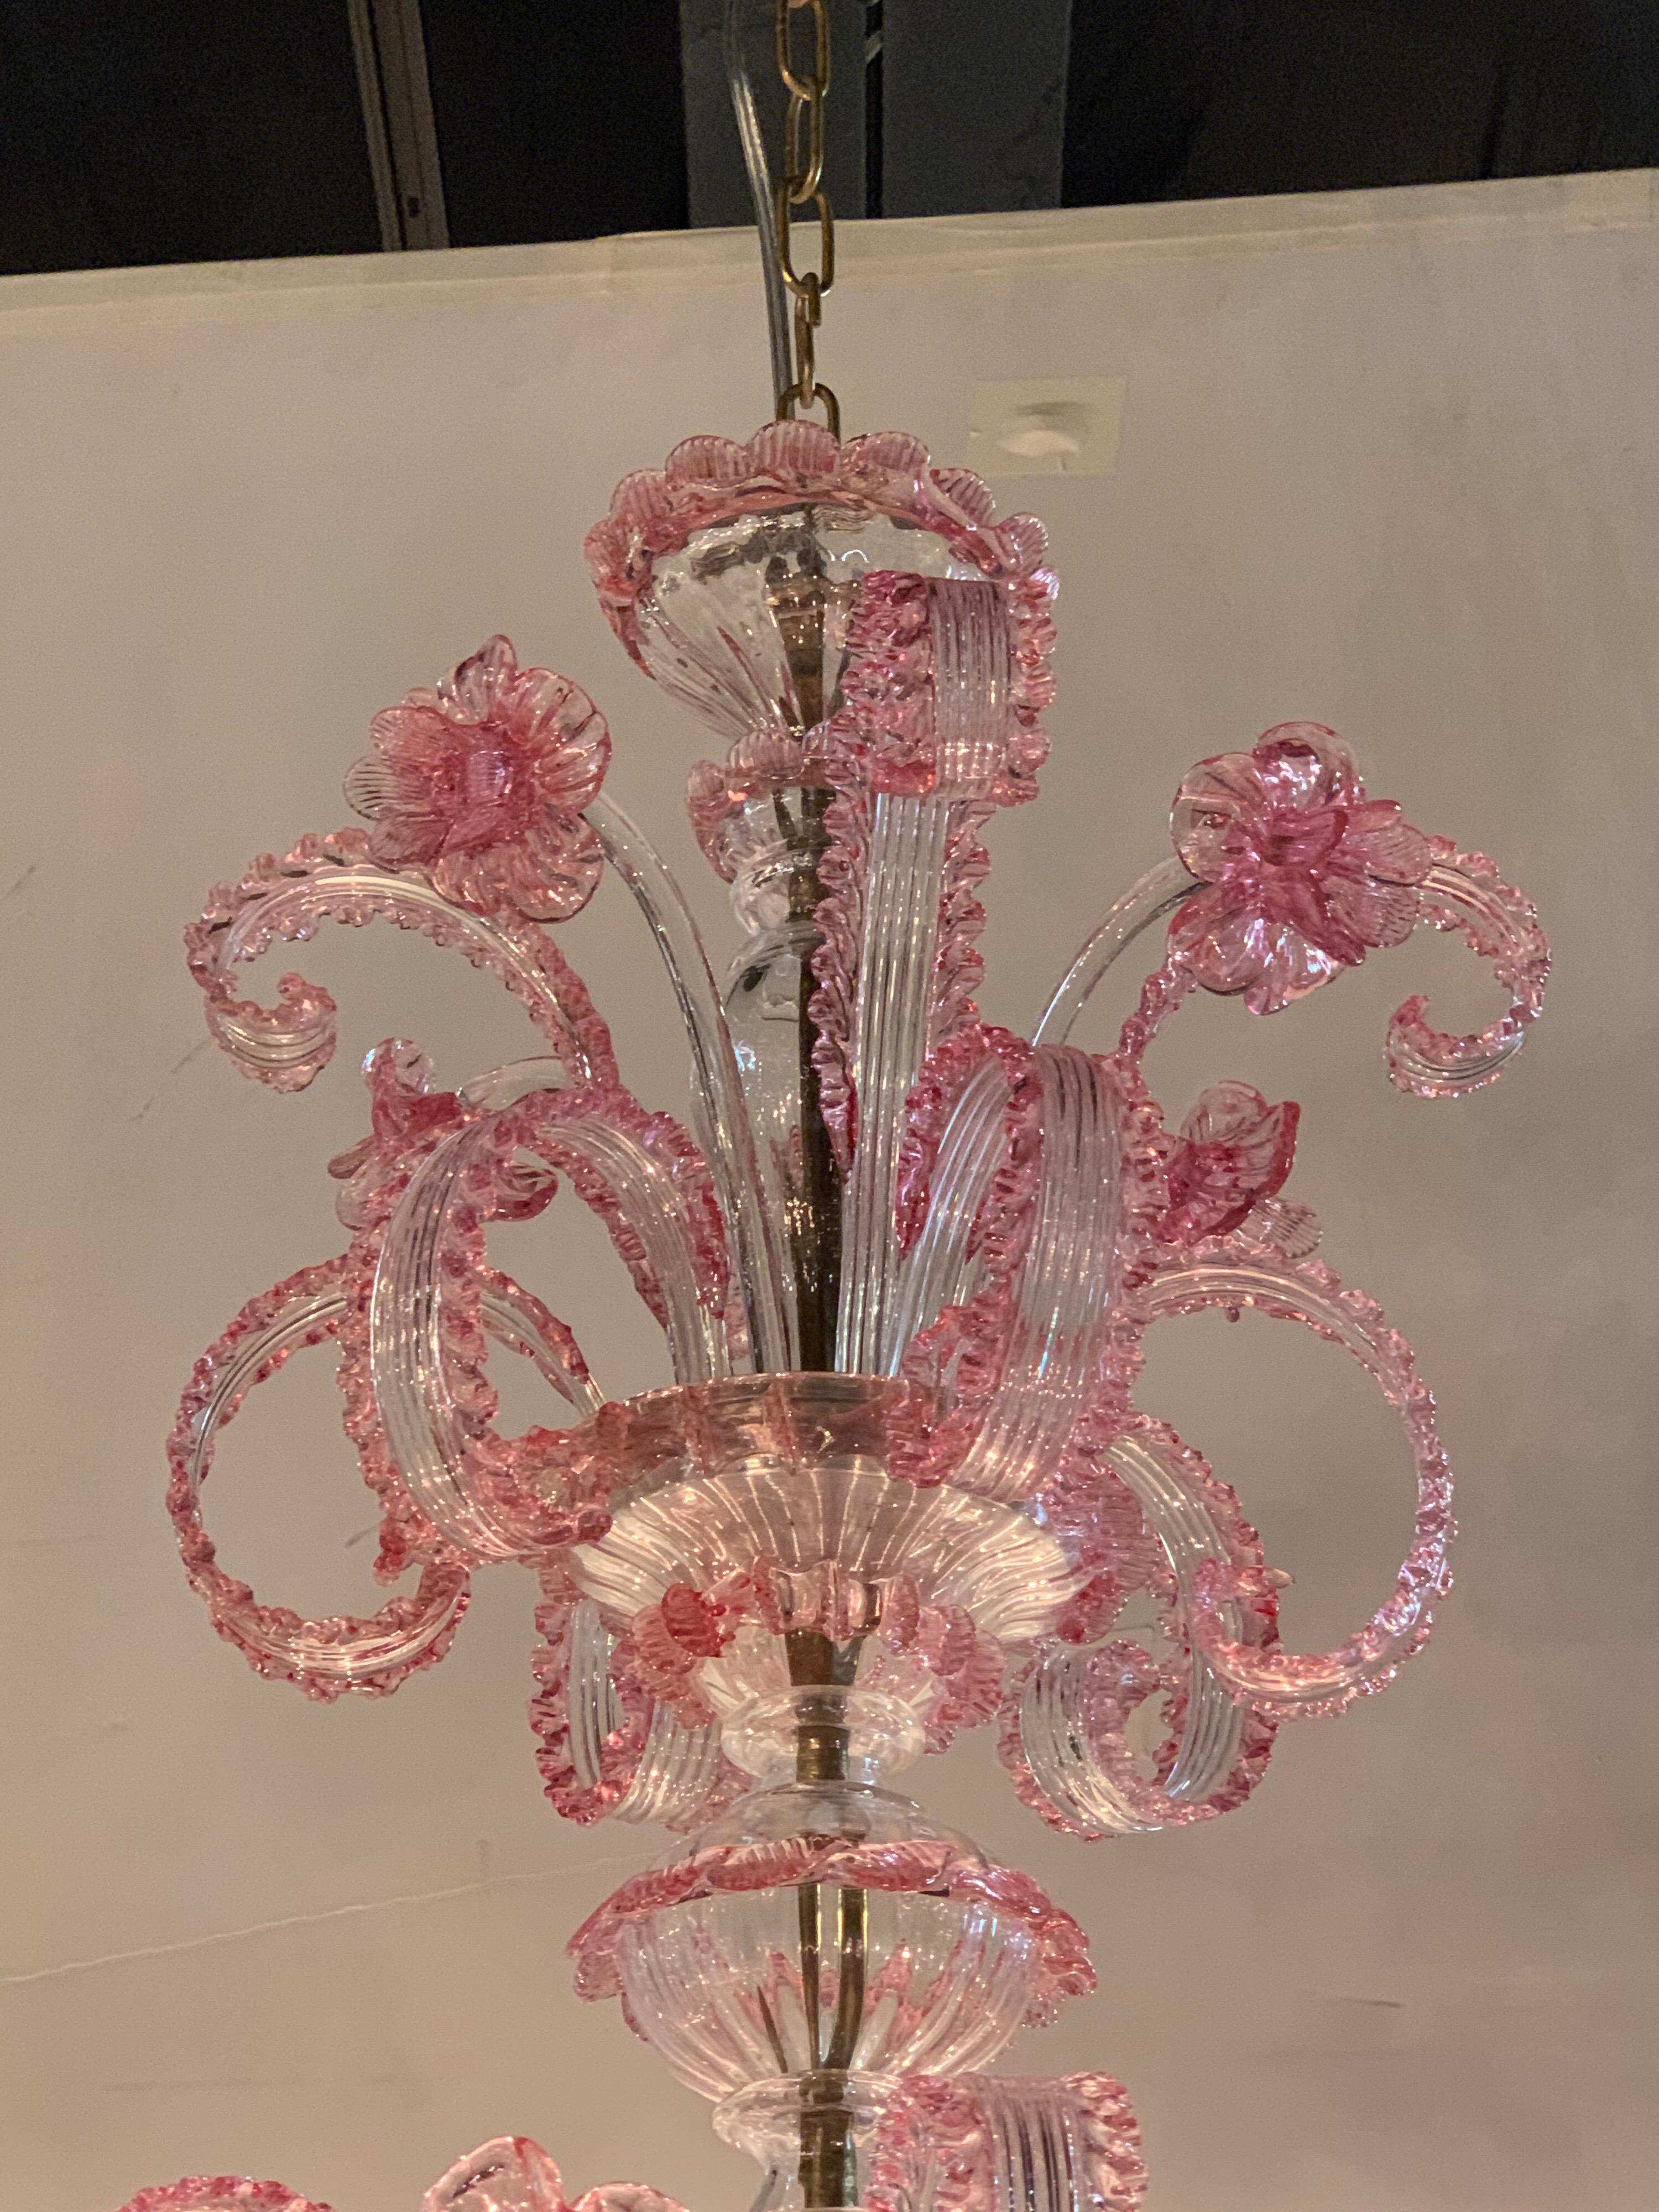 Gorgeous antique pink Murano glass chandelier with 8 lights. Beautiful details featuring flowers and leaves in a lovely shade of pink. Amazing craftsmanship and elegance to this piece!